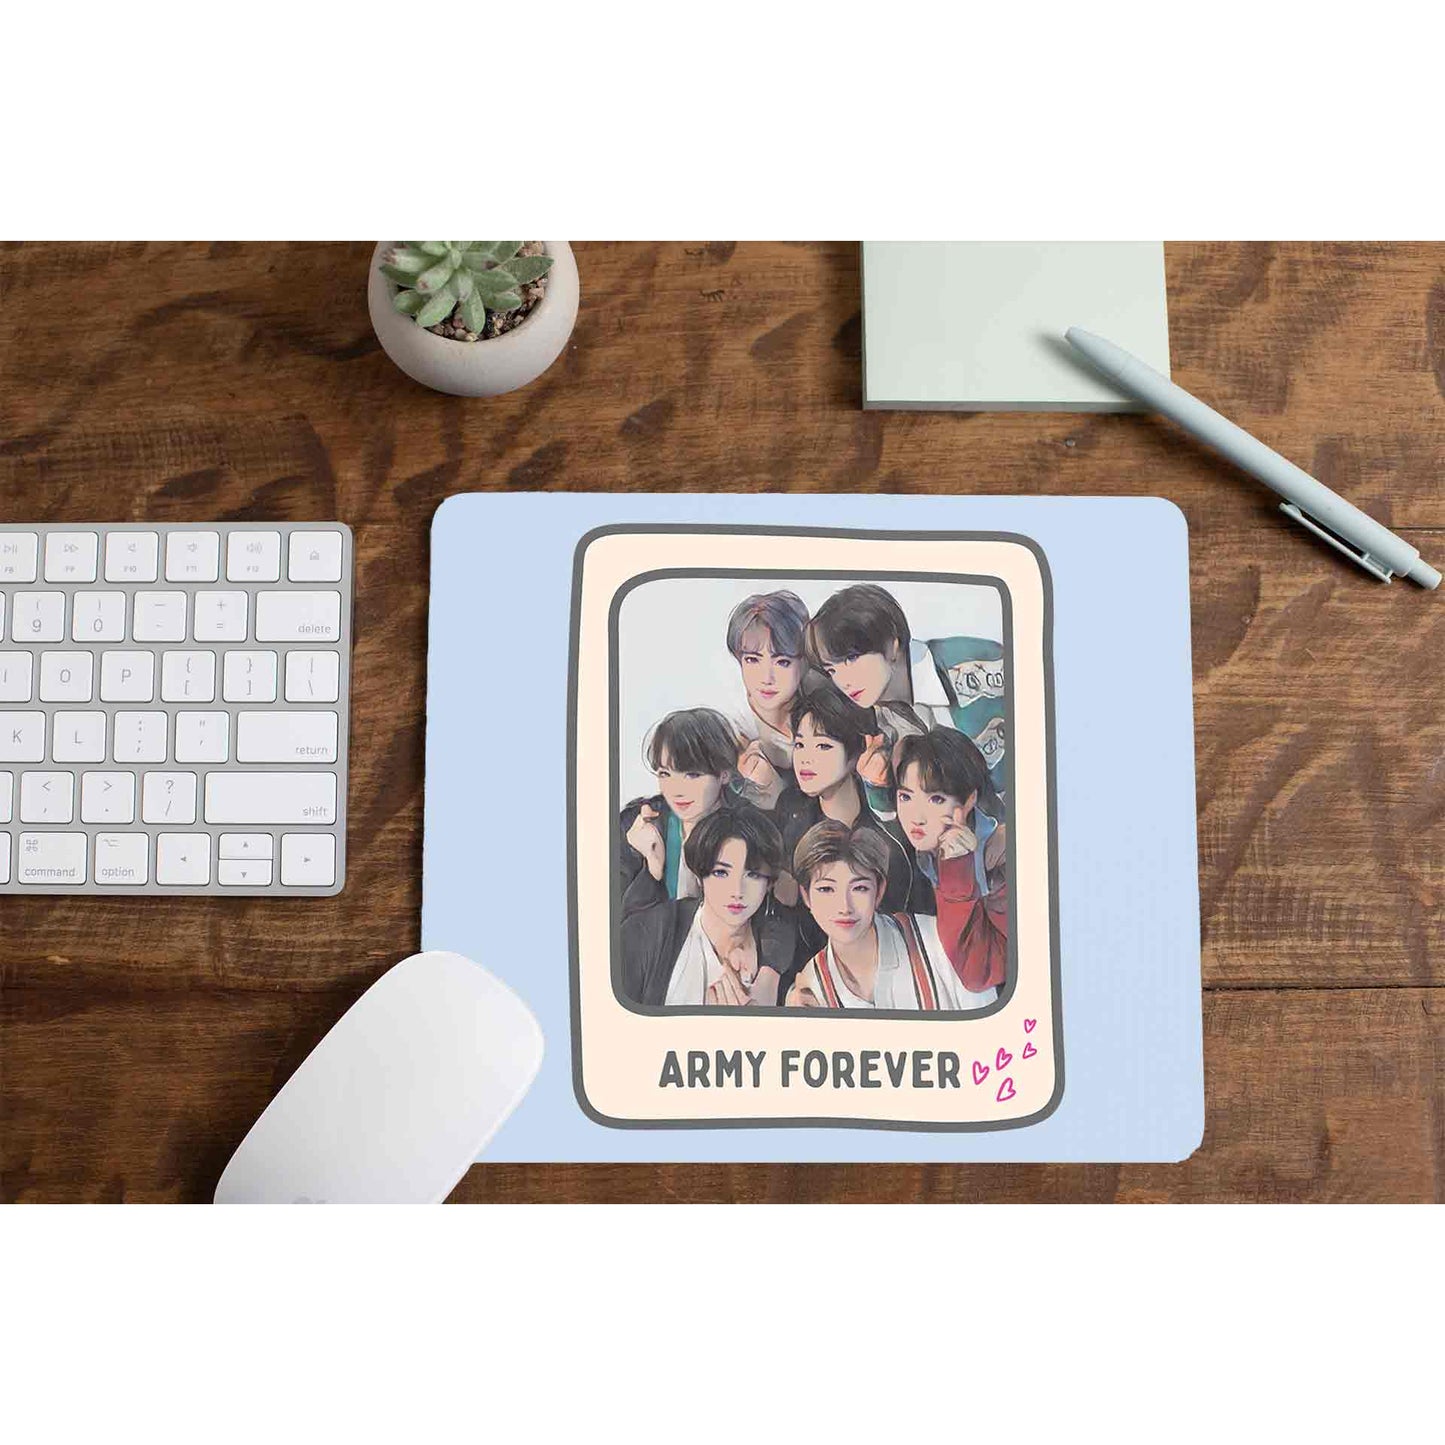 bts army forever mousepad logitech large music band buy online united states of america usa the banyan tee tbt men women girls boys unisex  